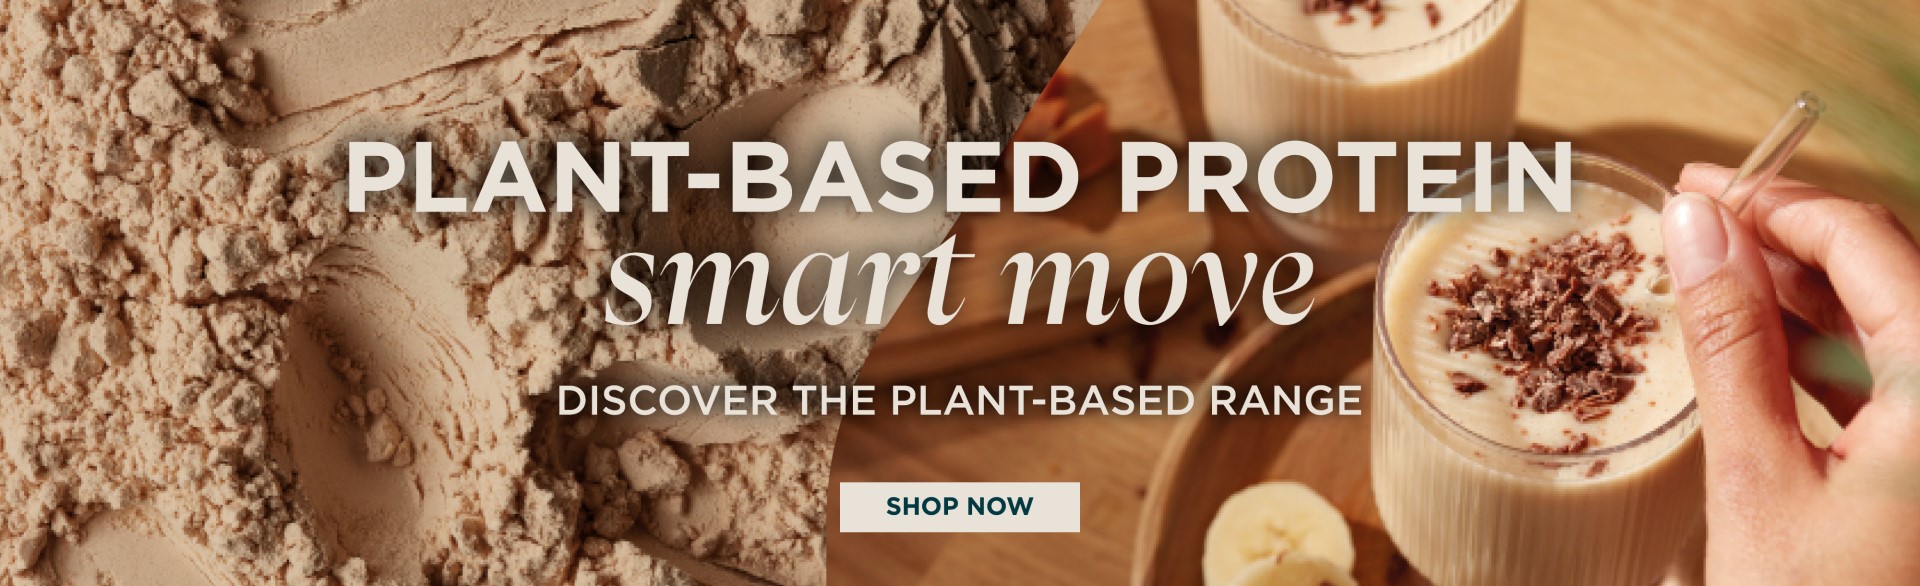 Discover the Plant-Based Range